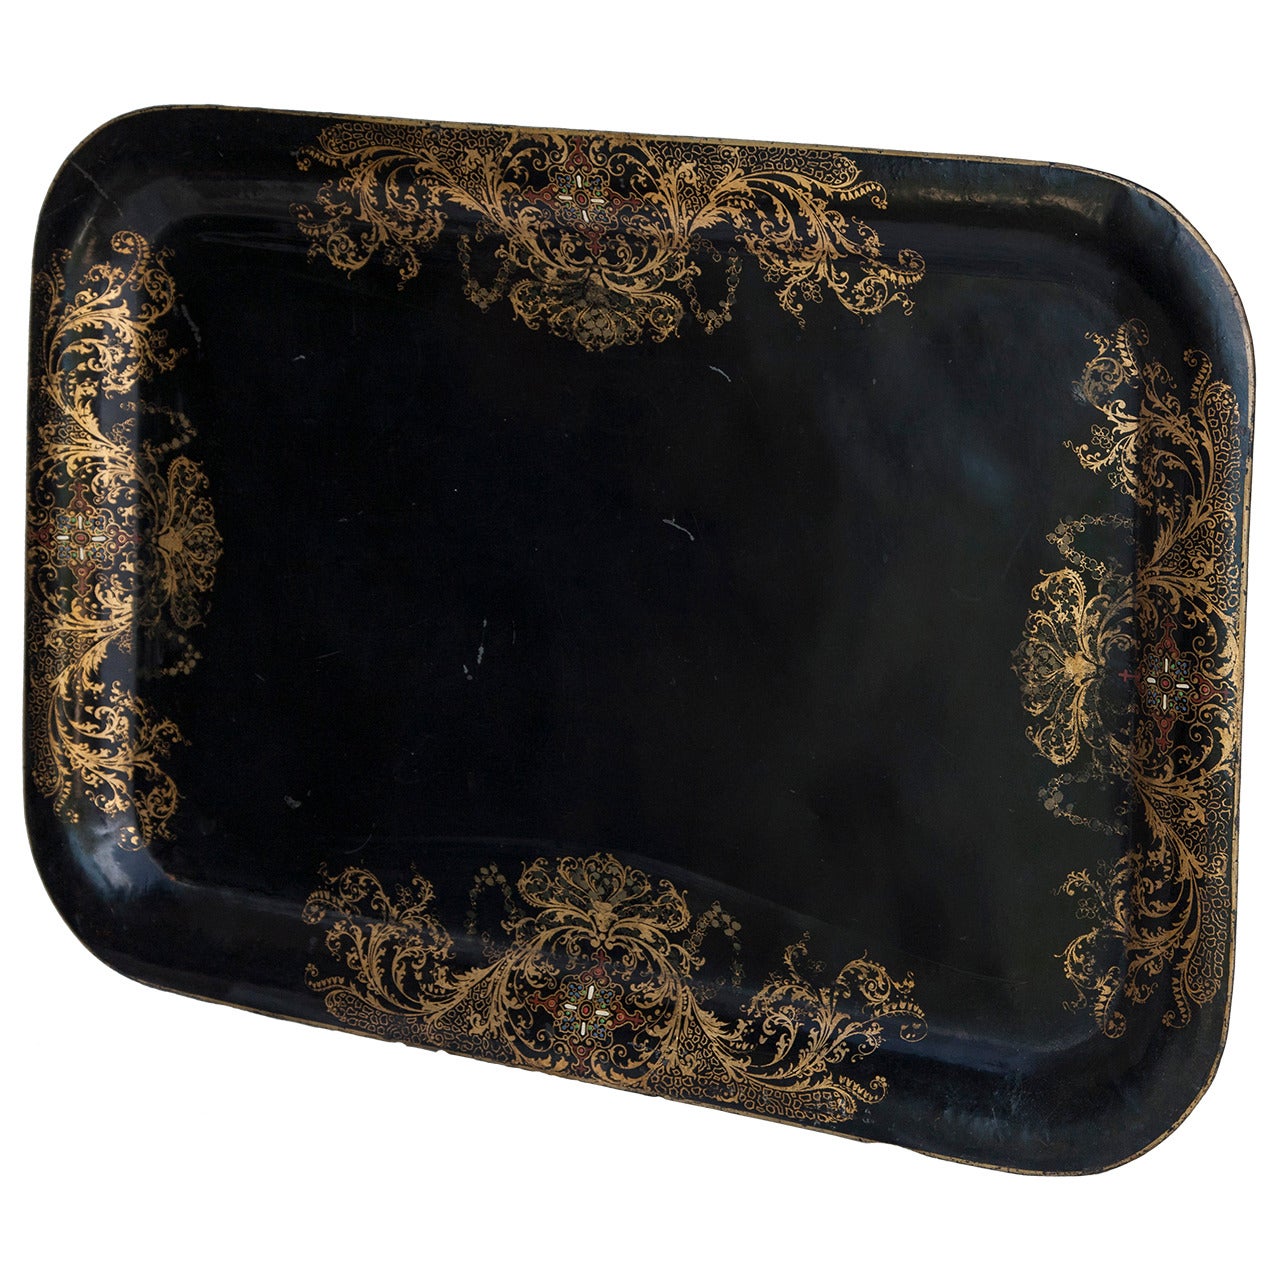 Napoleon III Black Tole Tray with Hand-Painted Gold Detailing, circa 1870